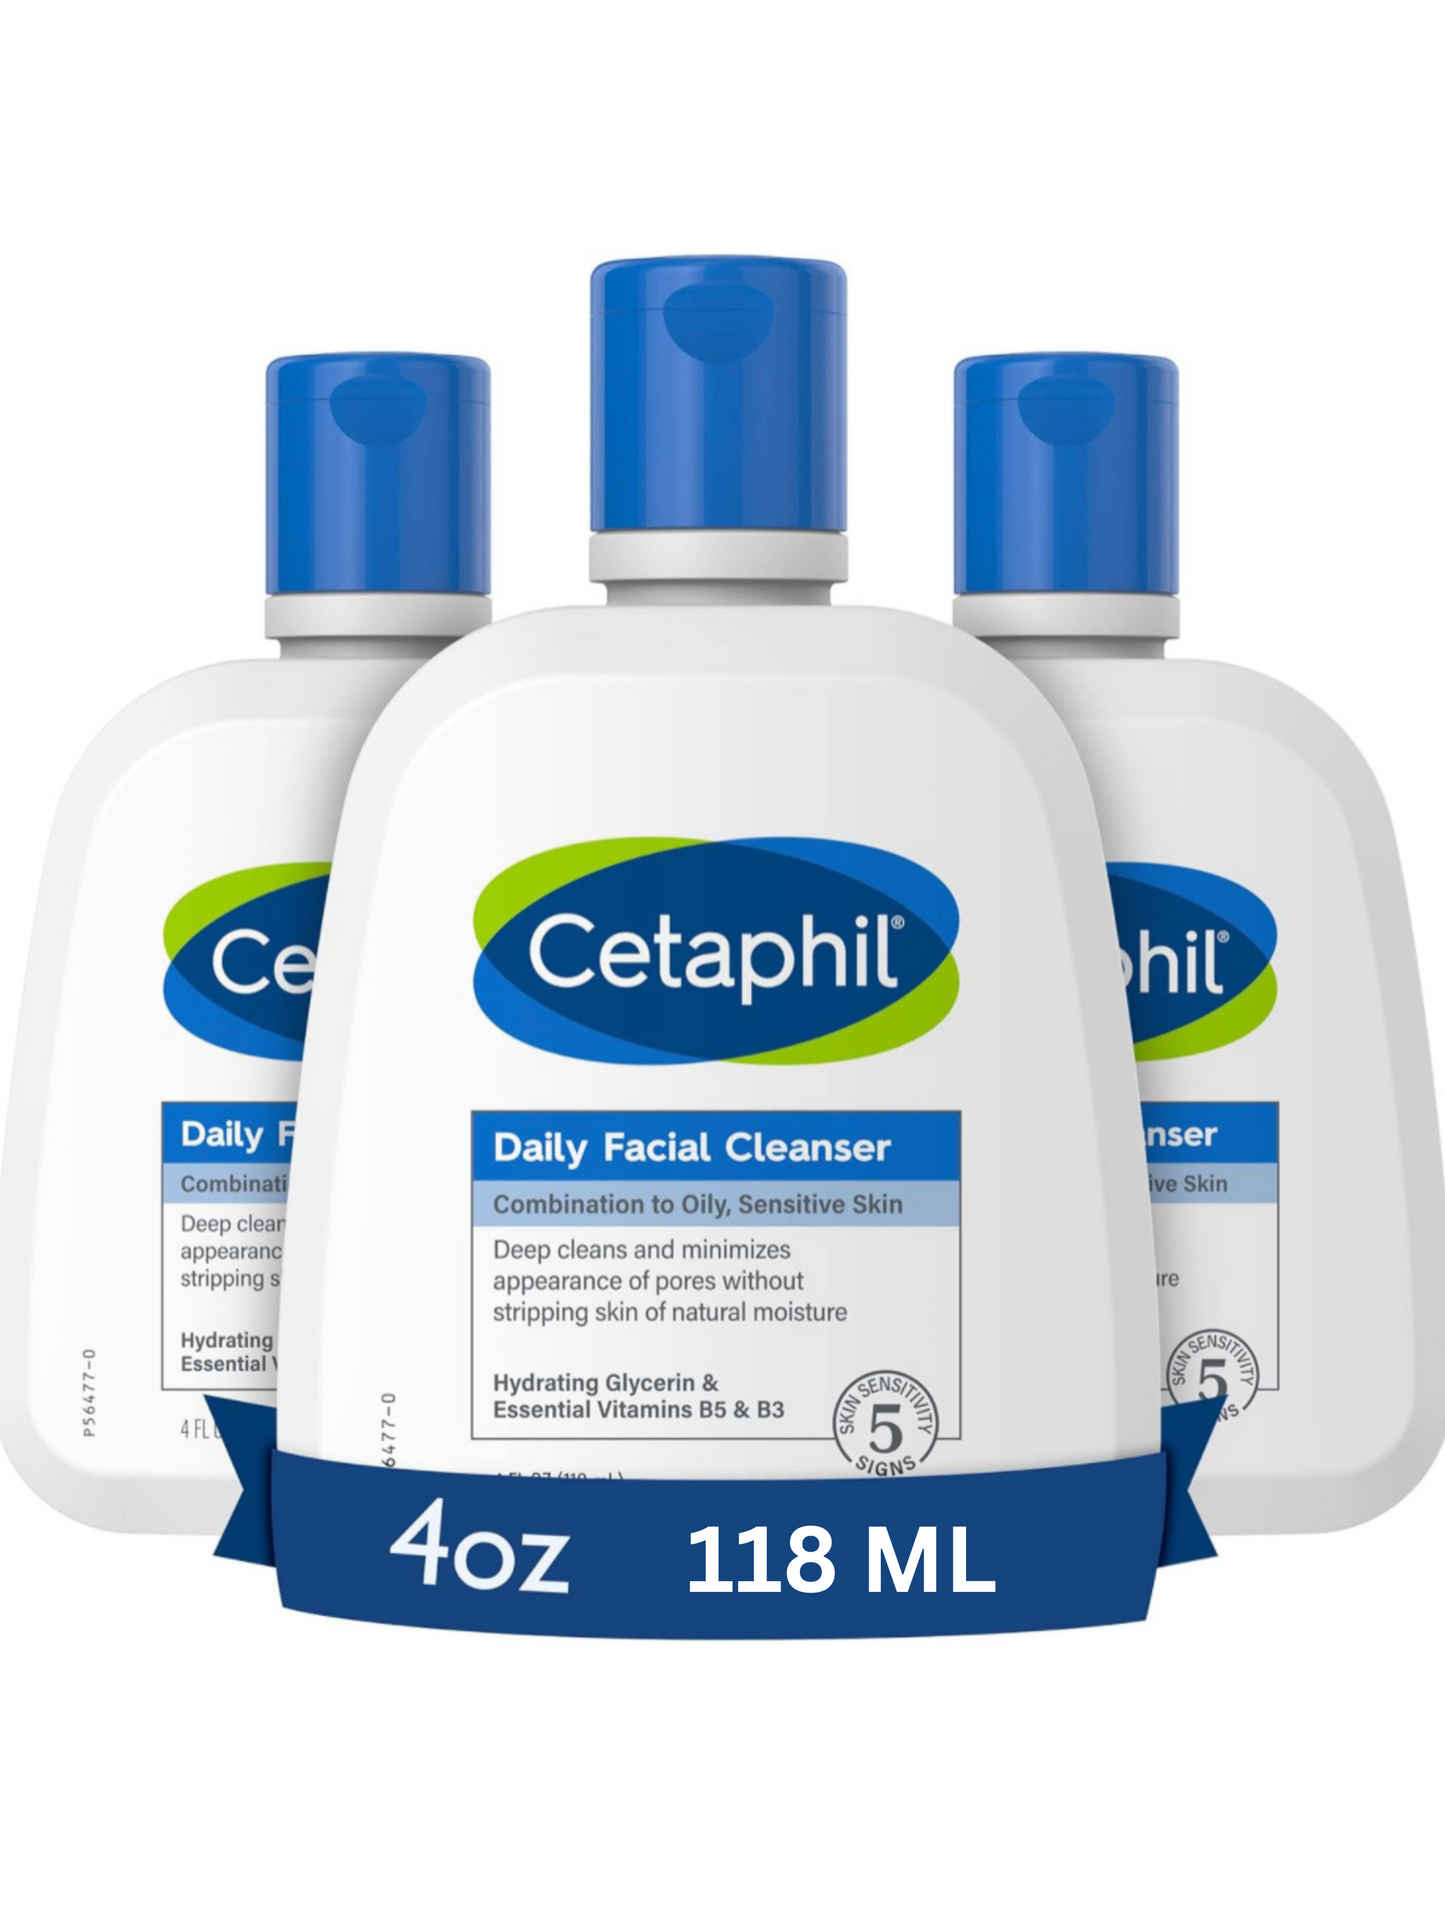 CETAPHIL Daily Facial Cleanser for Sensitive, Combination to Oily Skin